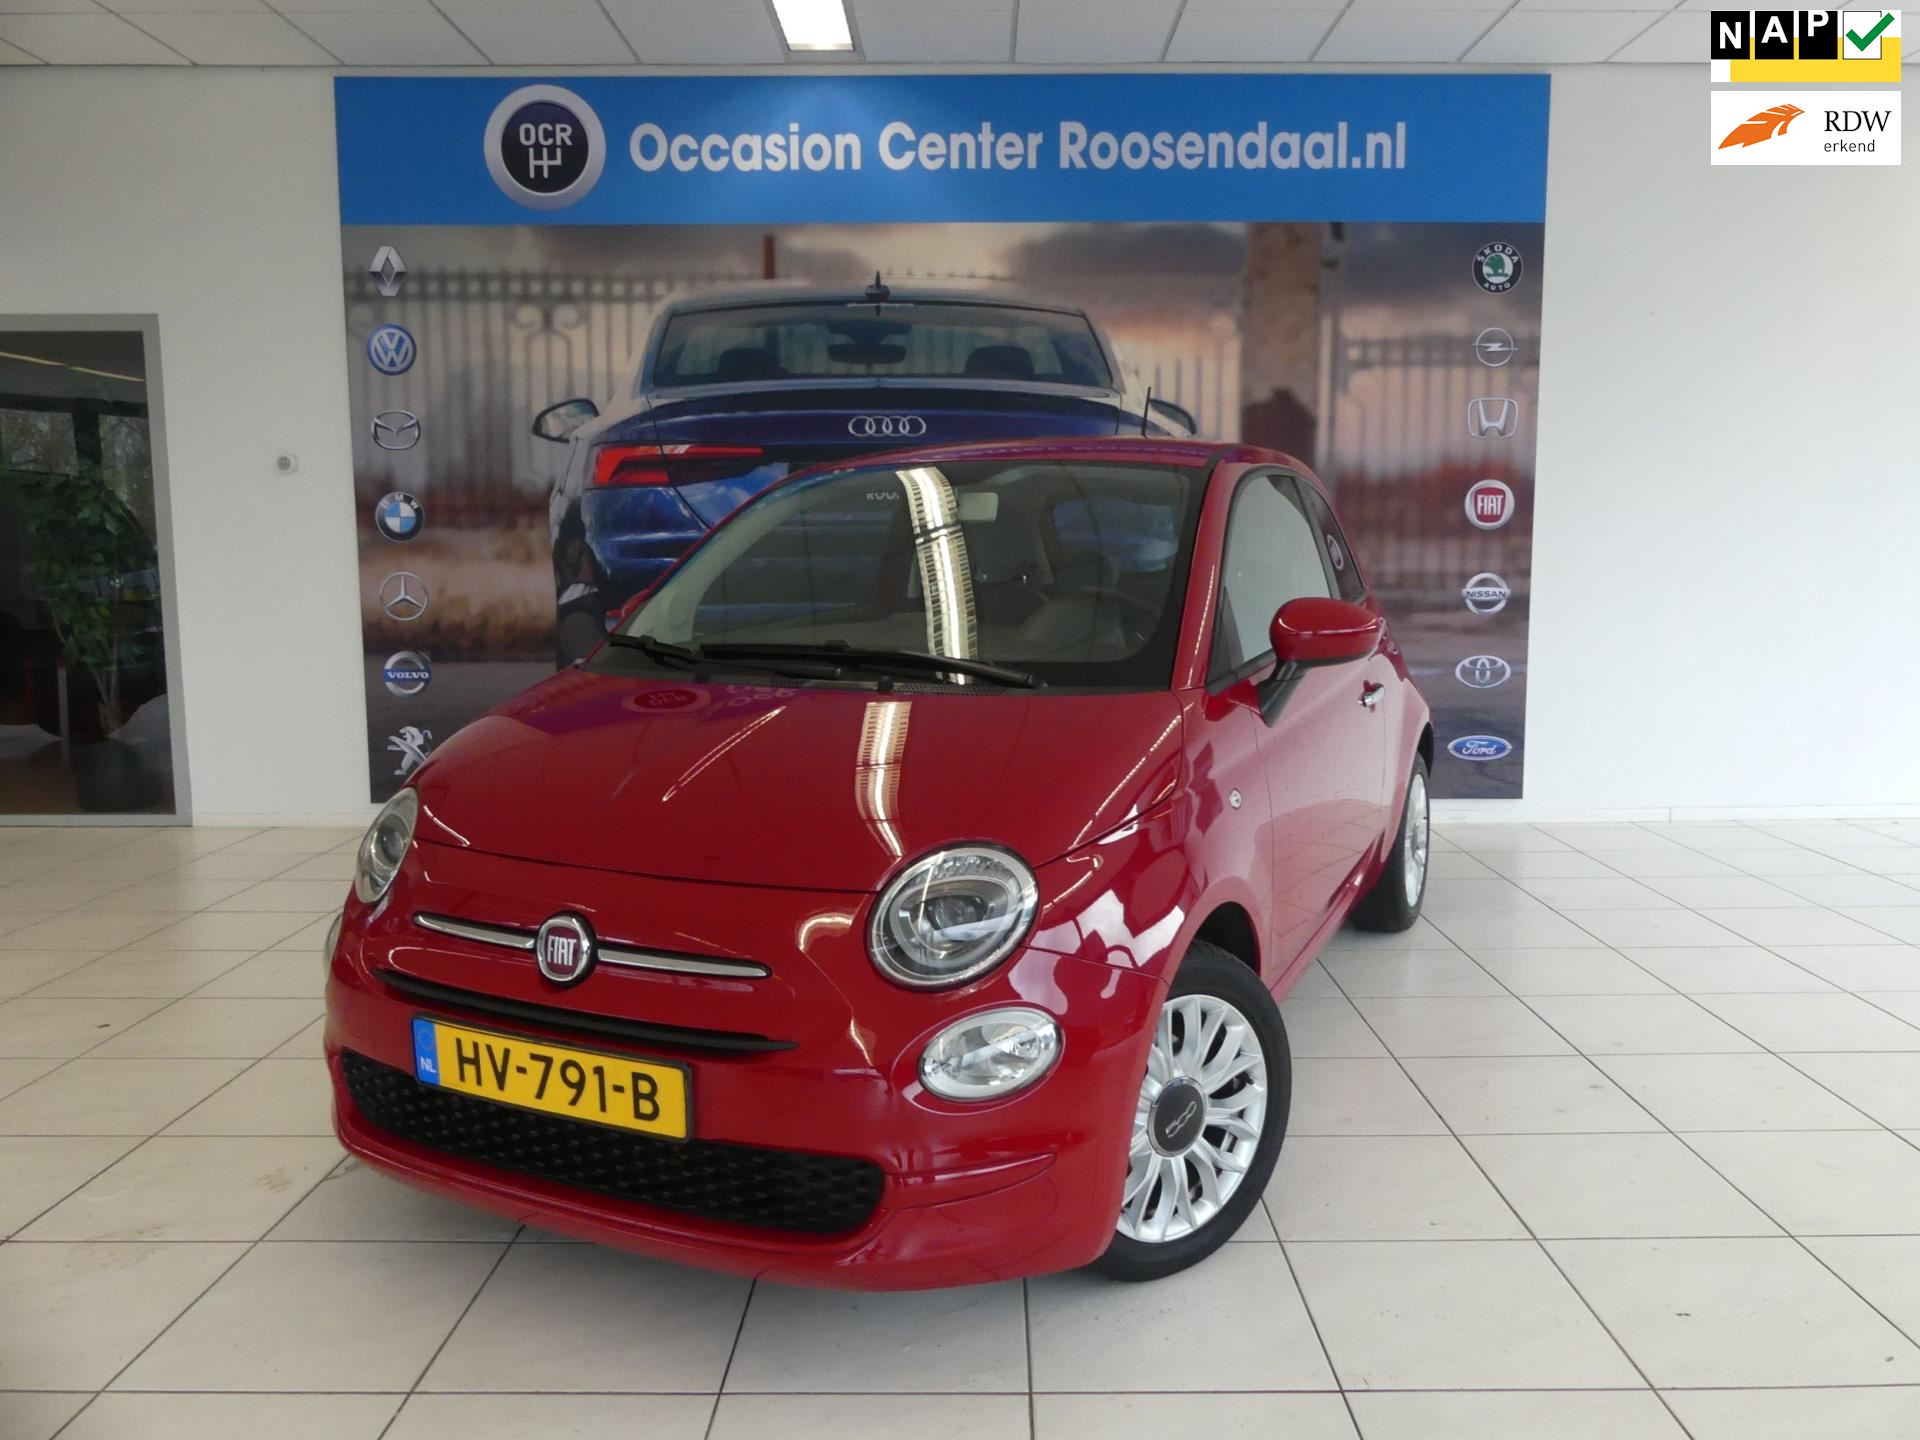 Fiat 500 occasion - Occasion Center Roosendaal